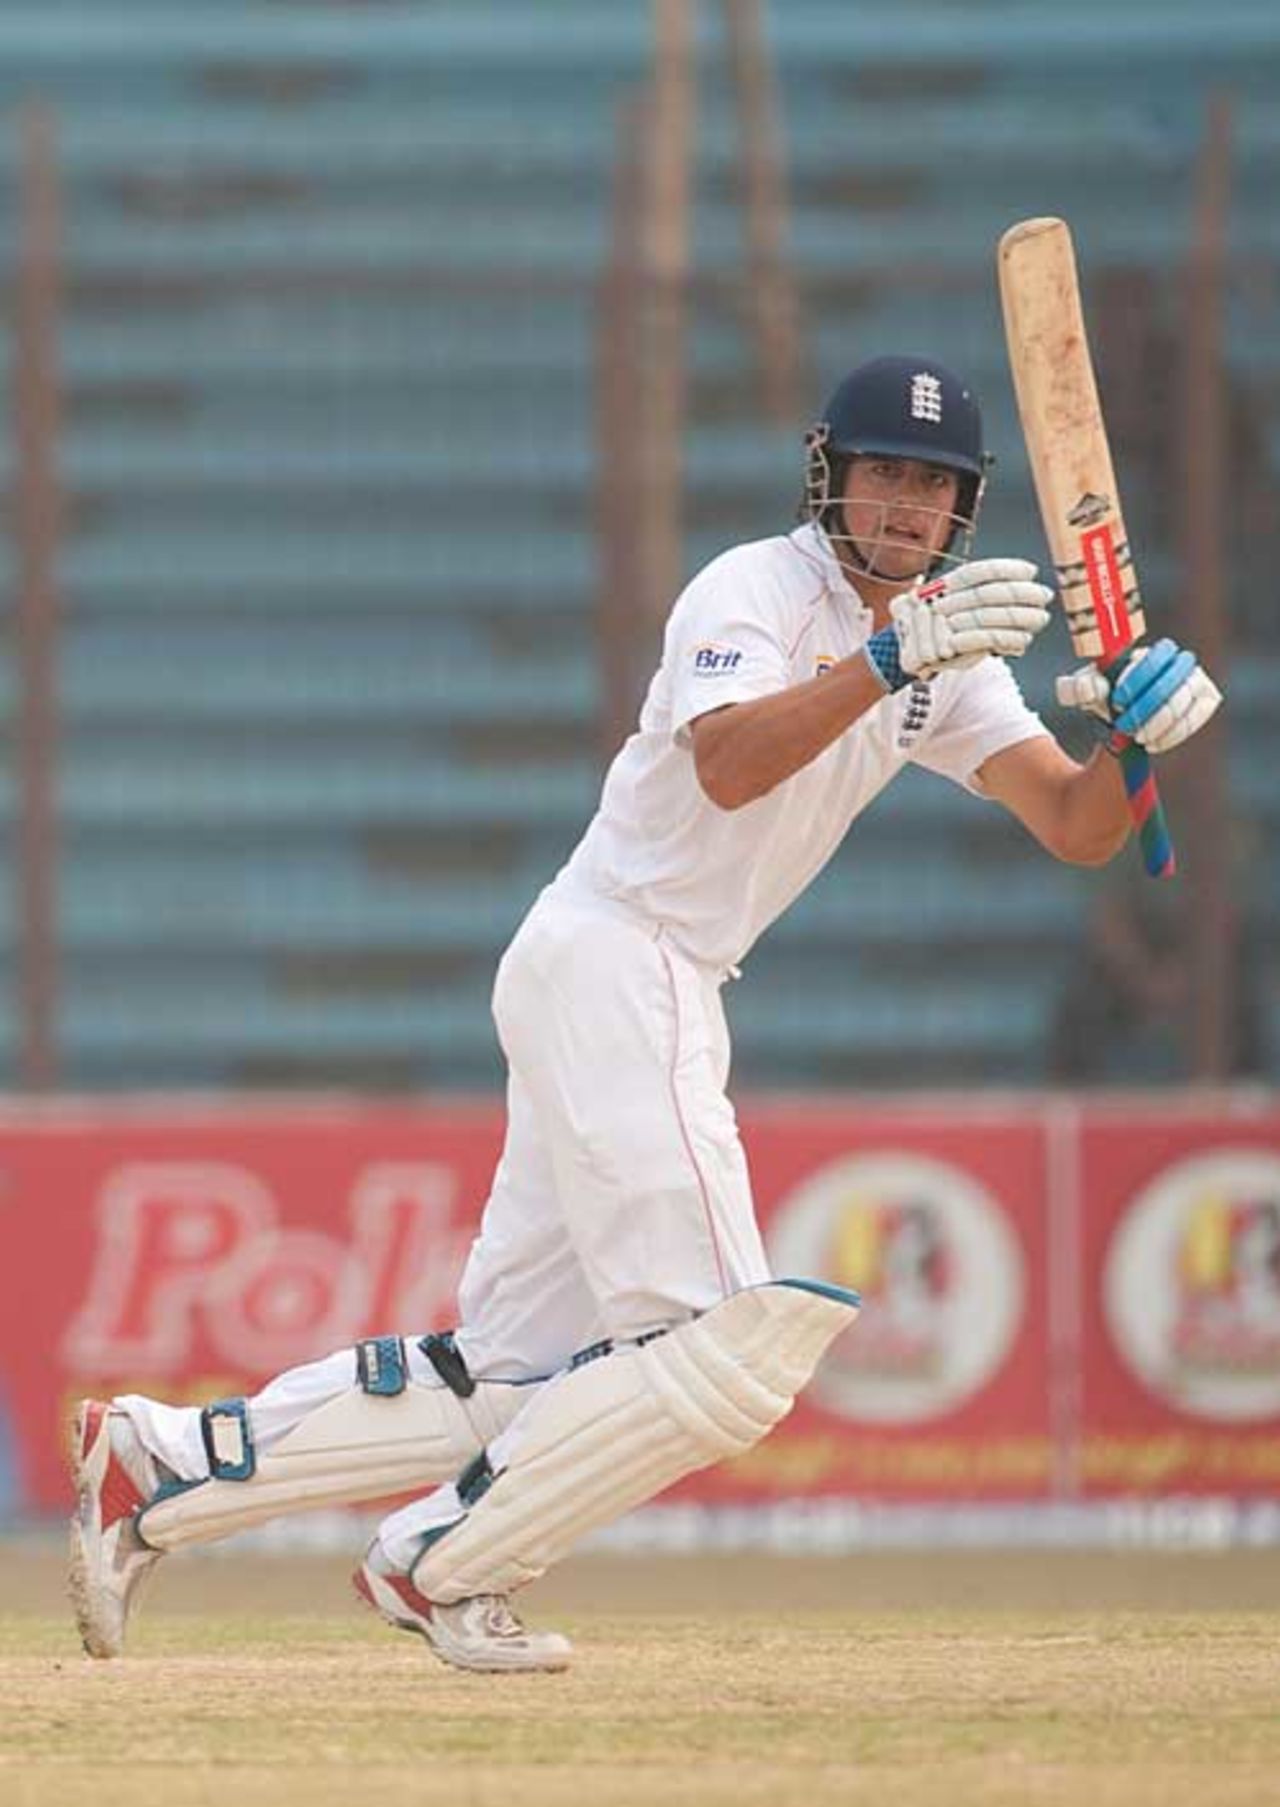 Alastair Cook fell for a career-best 173 on the second morning, Bangladesh v England, 1st Test, Chittagong, March 13, 2010